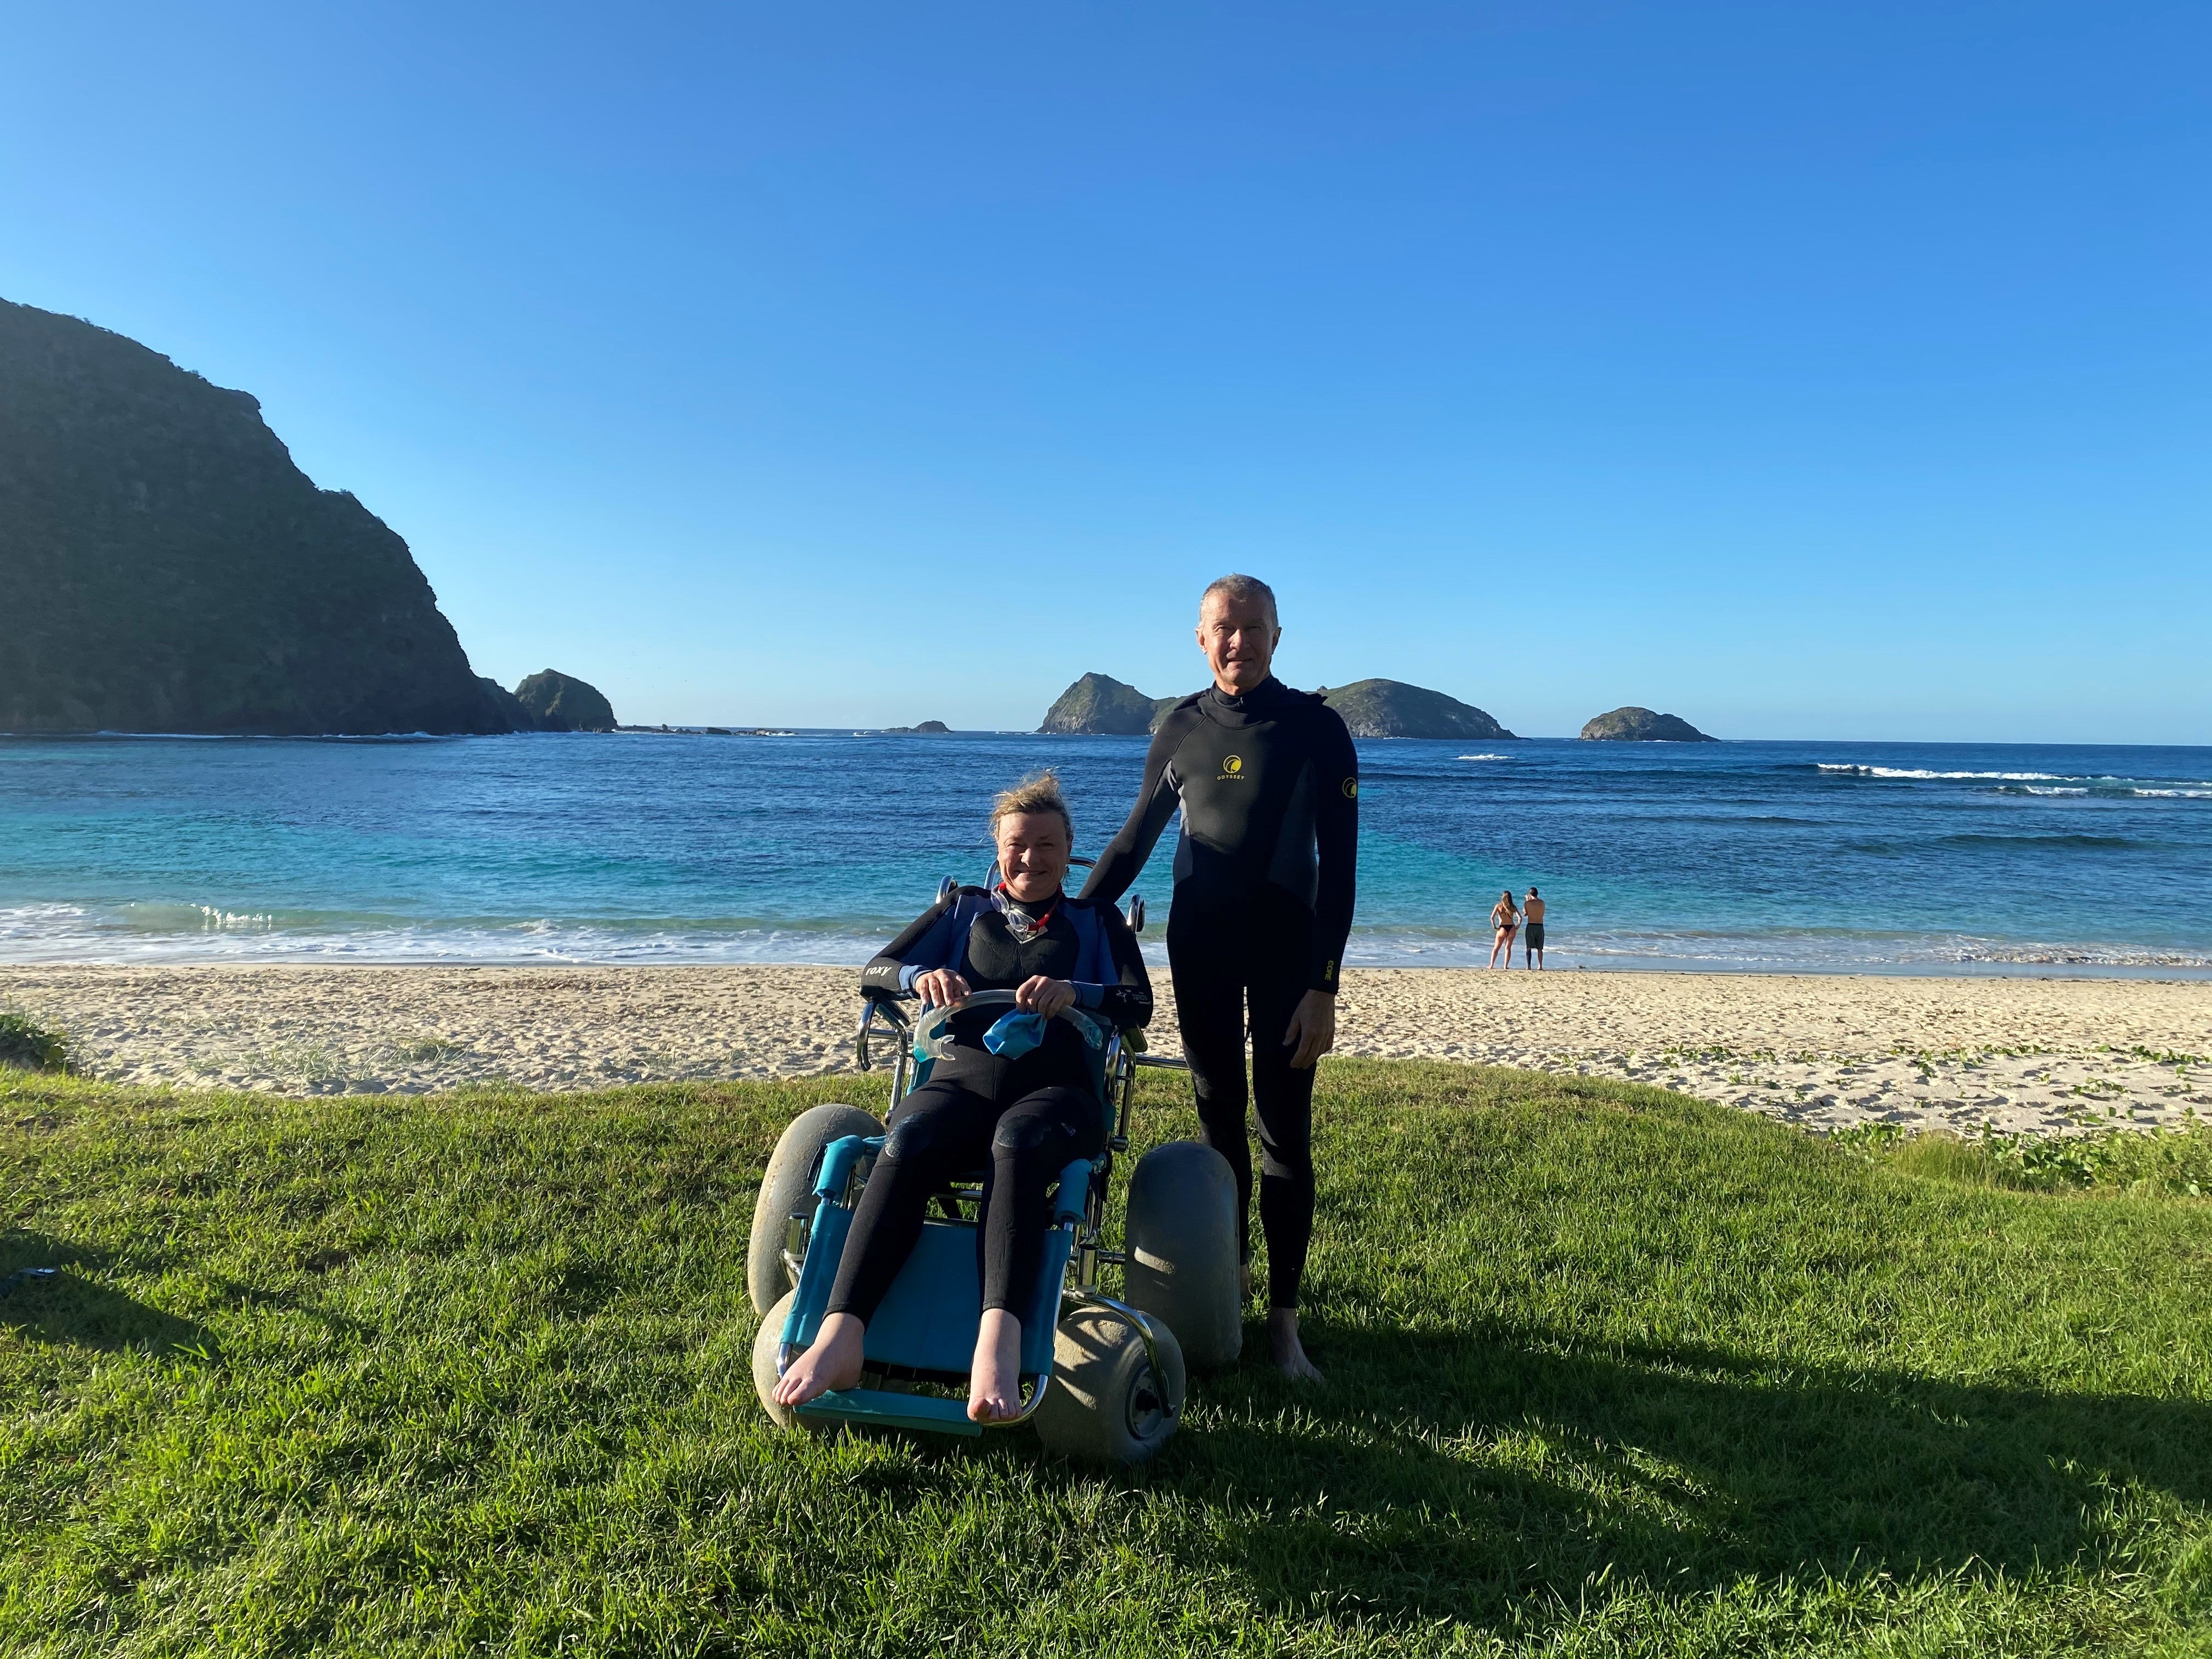 Image of Jane with another person. Jane is sitting in a wheelchair and the man is standing. They are on grass with white sand and blue water behind them. There are mountains behind the water. Both people are smiling. The sky is blue.